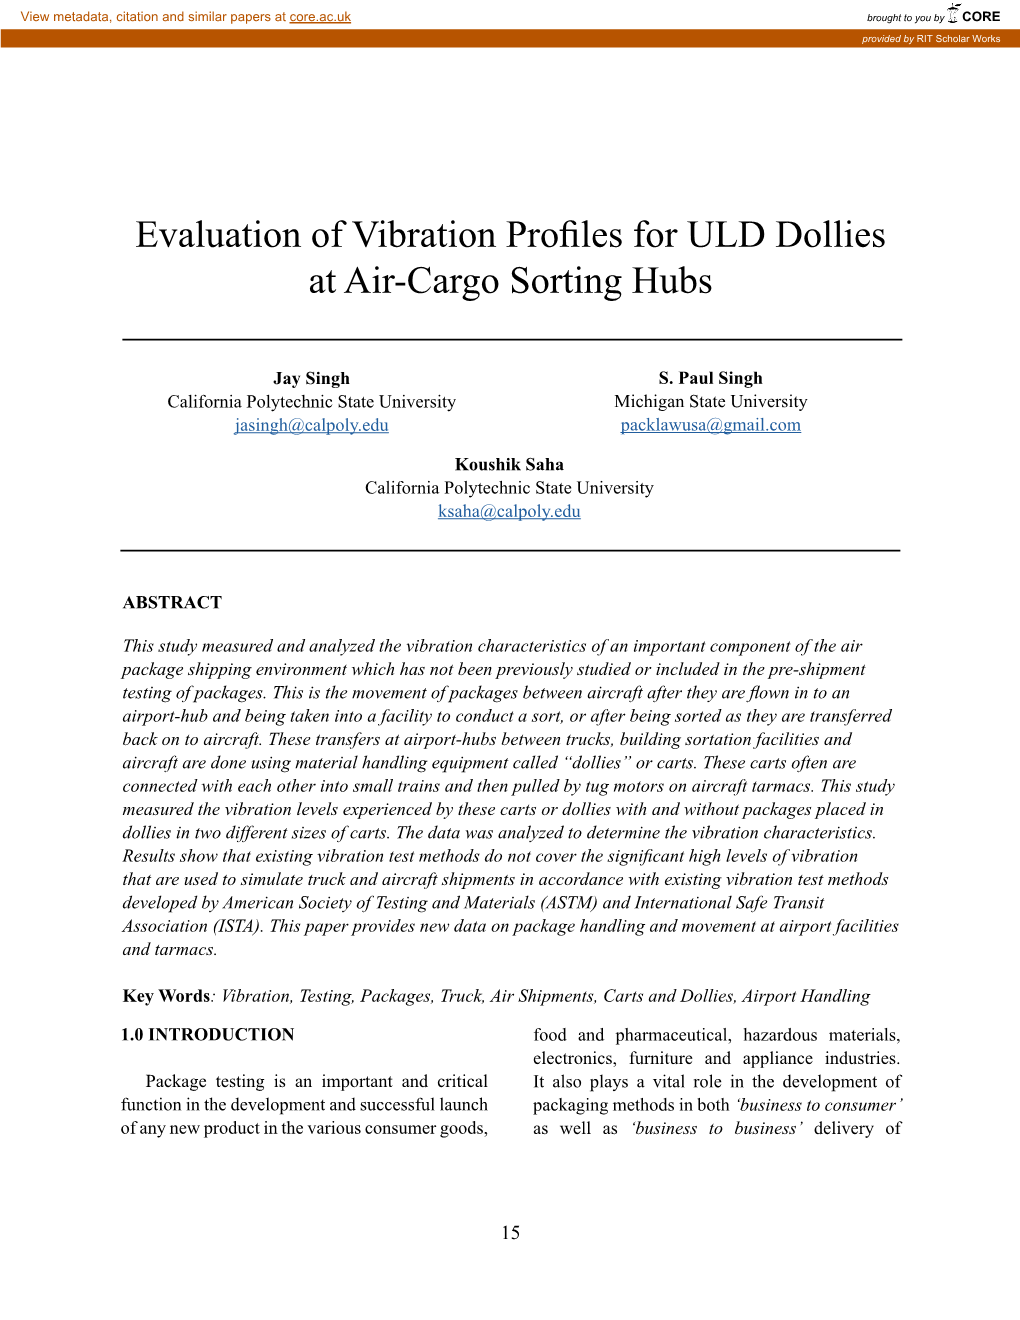 Evaluation of Vibration Profiles for ULD Dollies at Air-Cargo Sorting Hubs